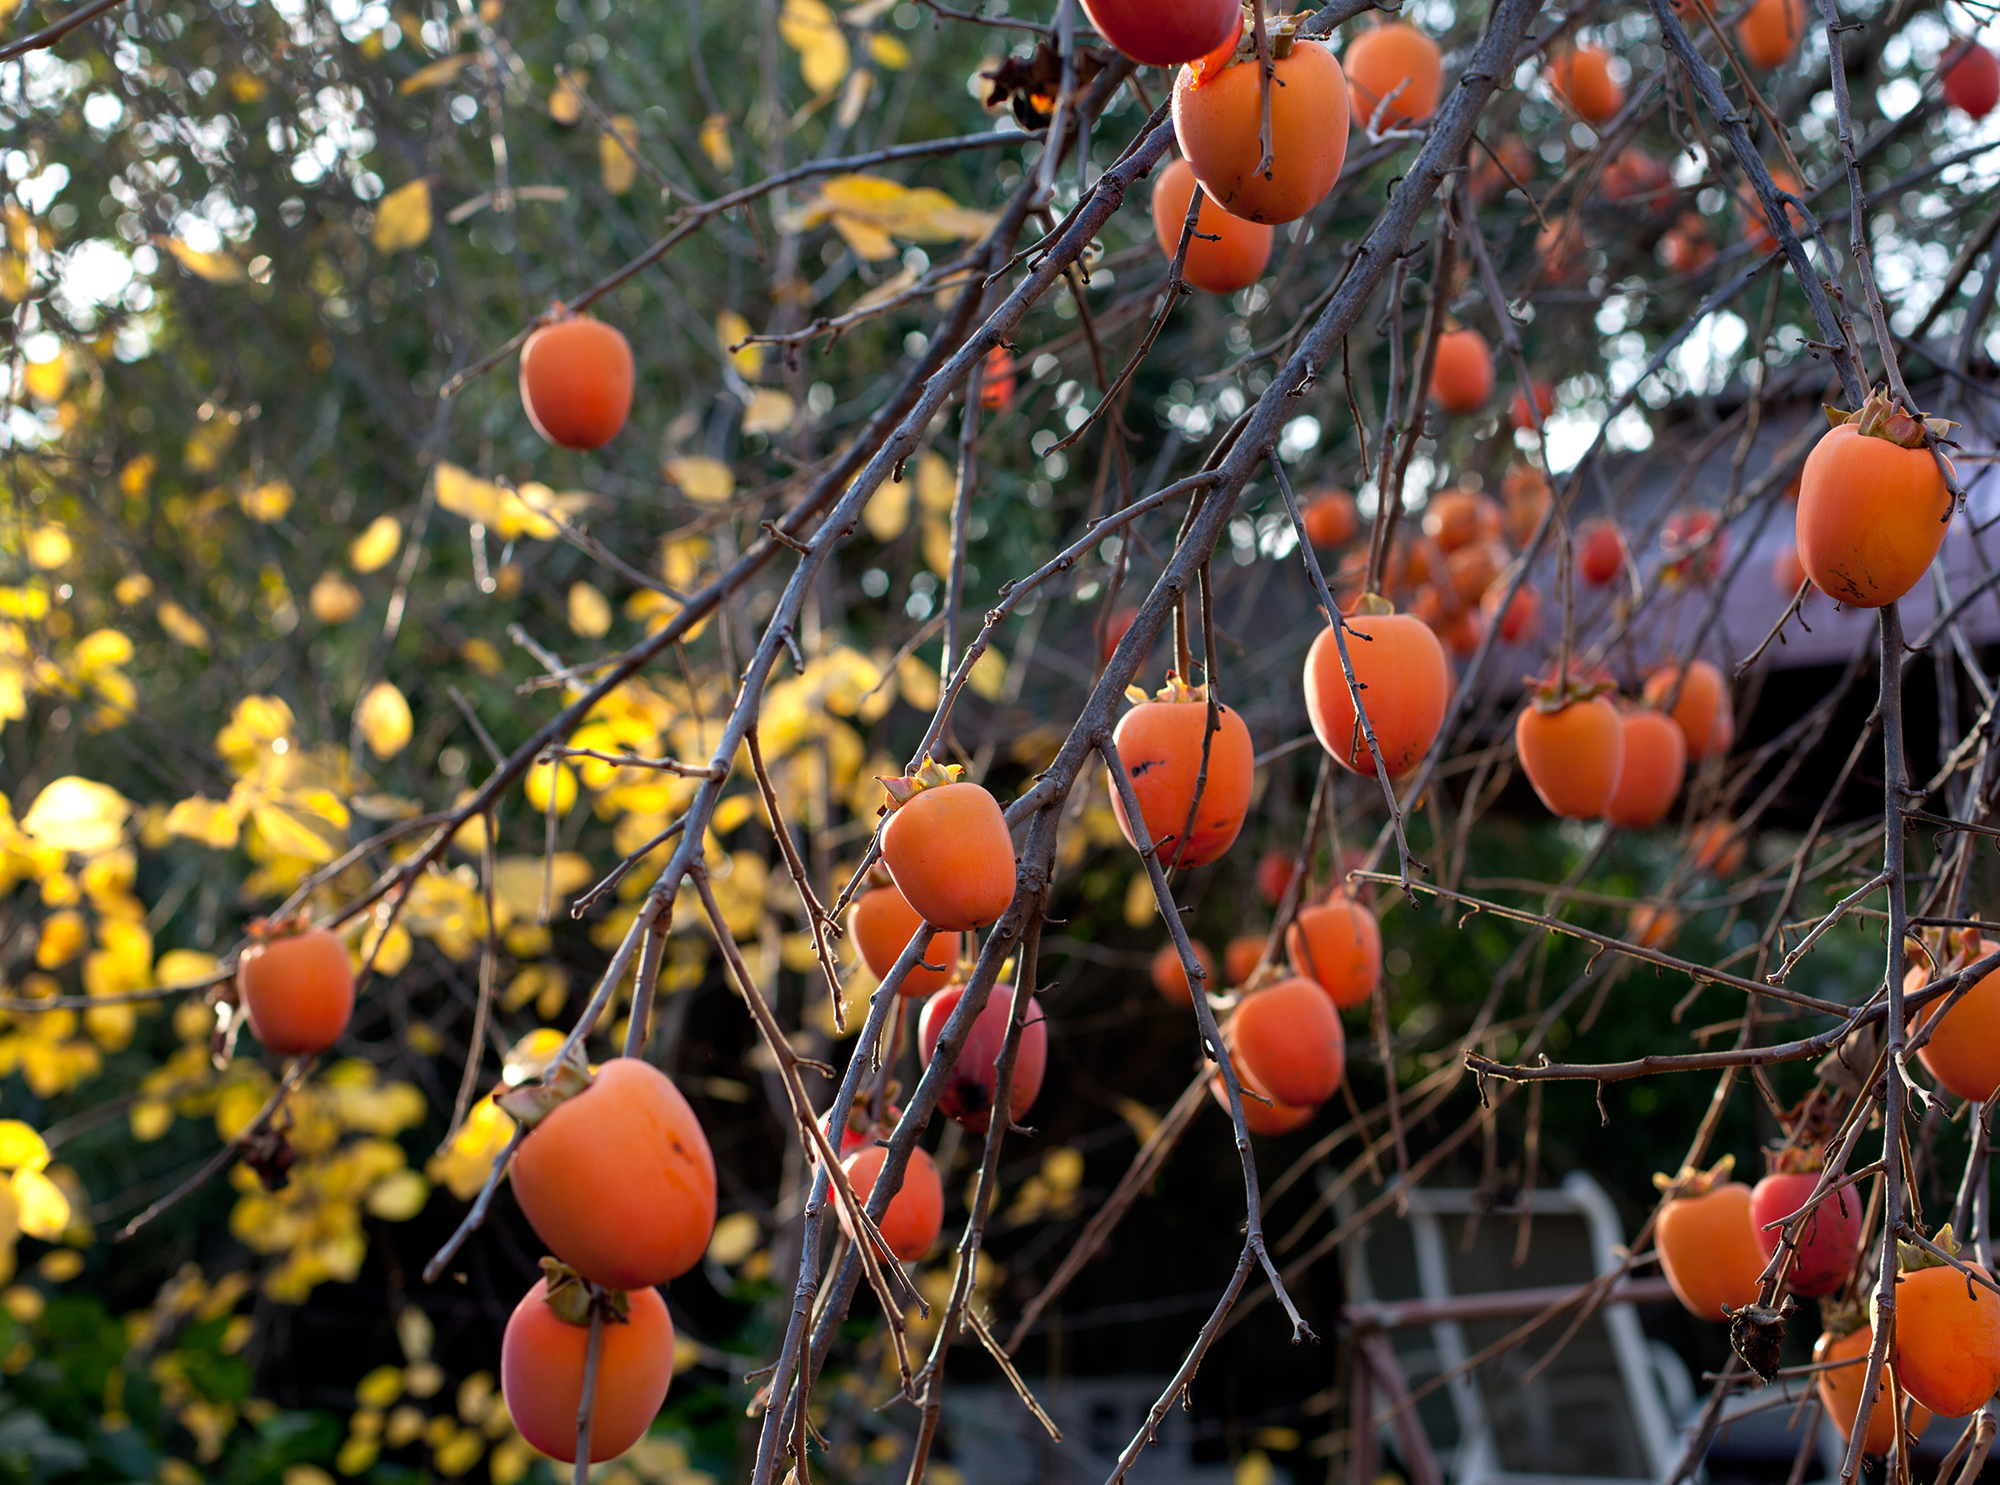 2000-fruit-of-the-persimmon-tree-by-Robert-Couse-Baker.png